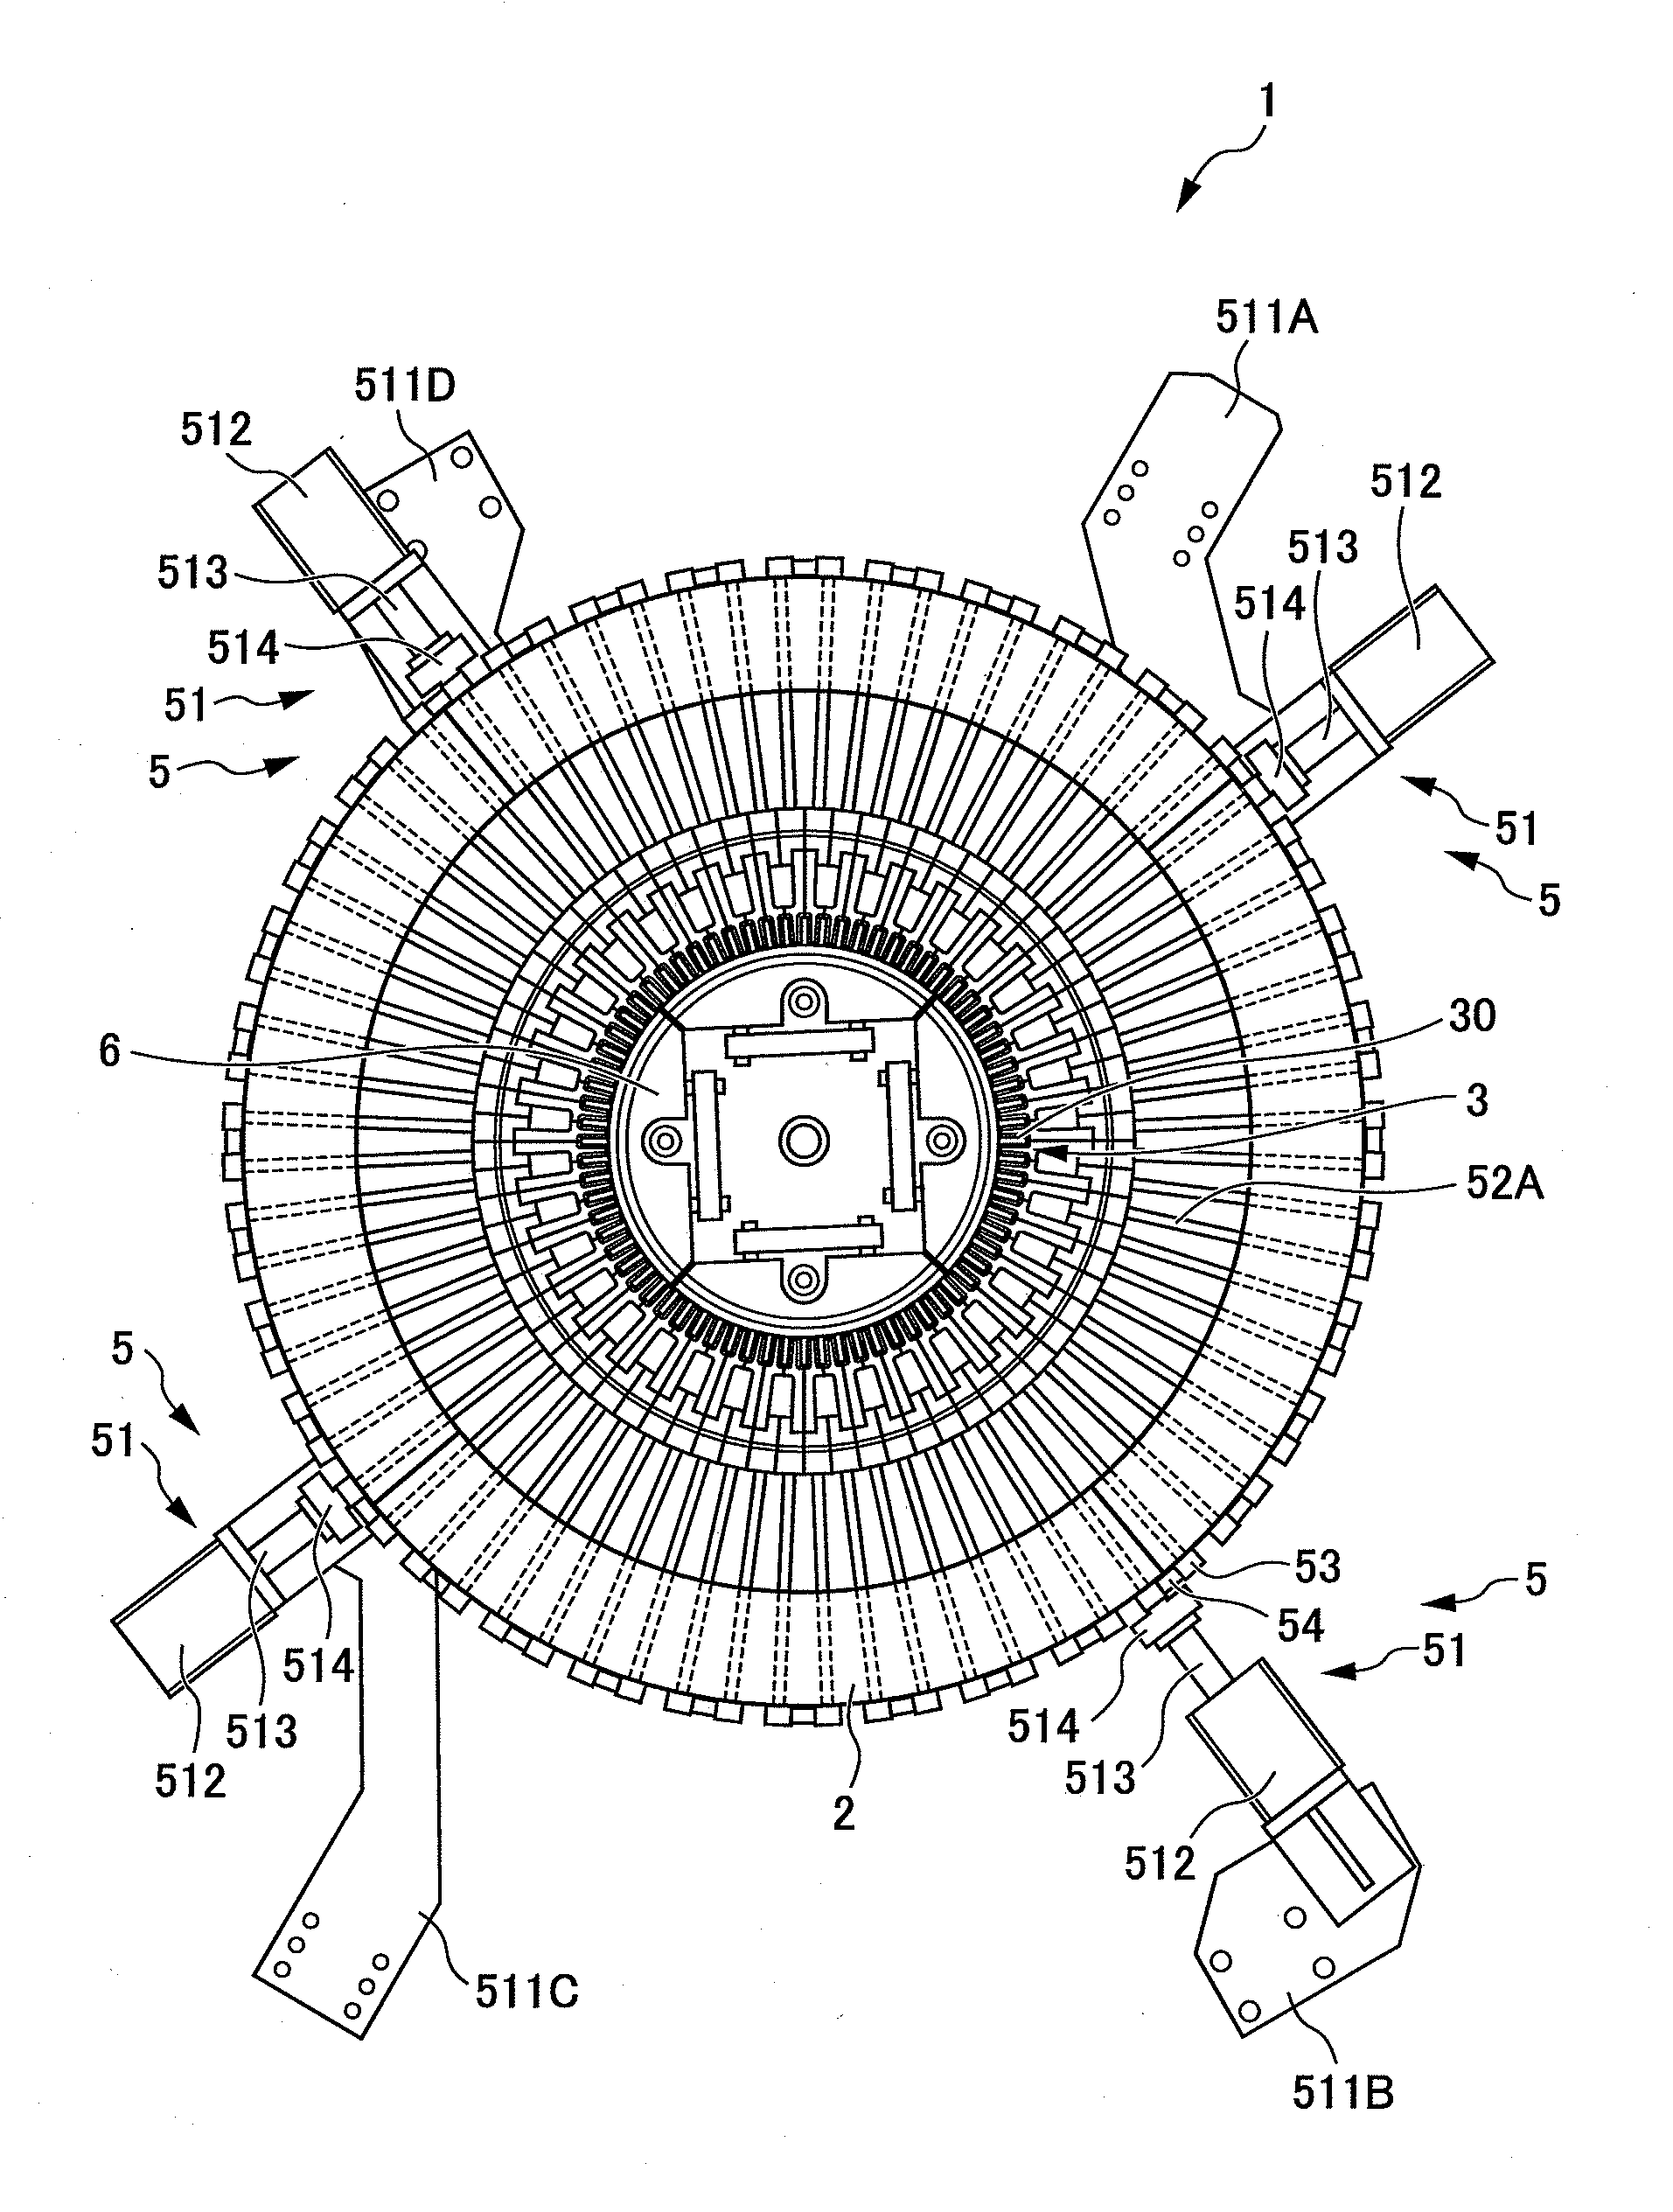 Insertion system for electrical conductor